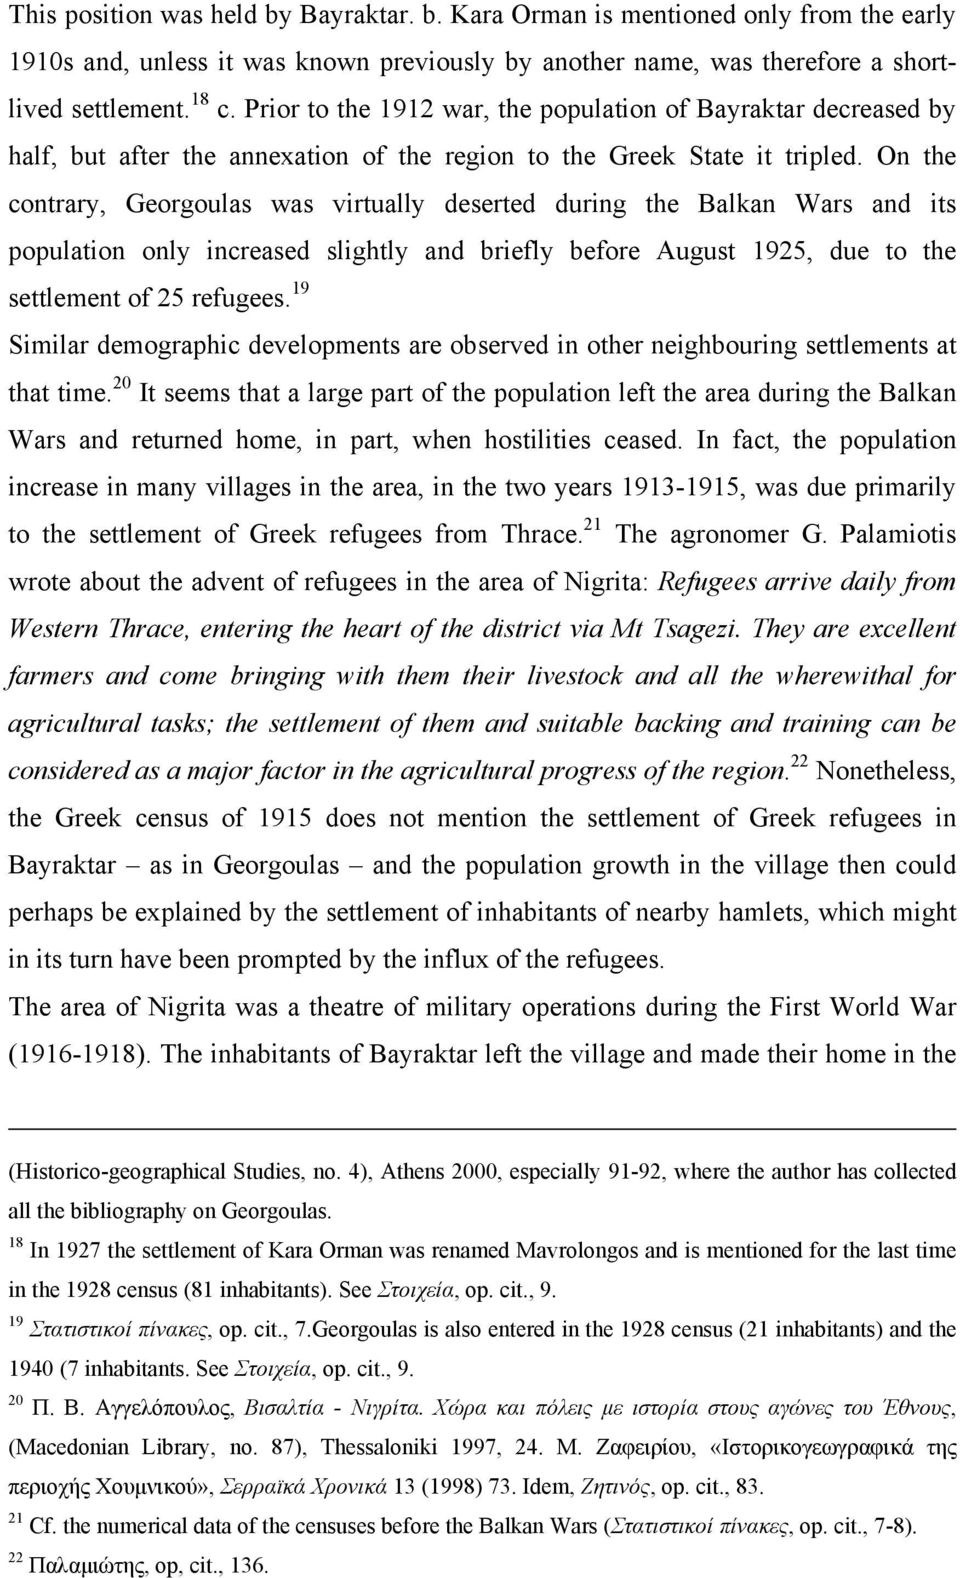 On the contrary, Georgoulas was virtually deserted during the Balkan Wars and its population only increased slightly and briefly before August 1925, due to the settlement of 25 refugees.